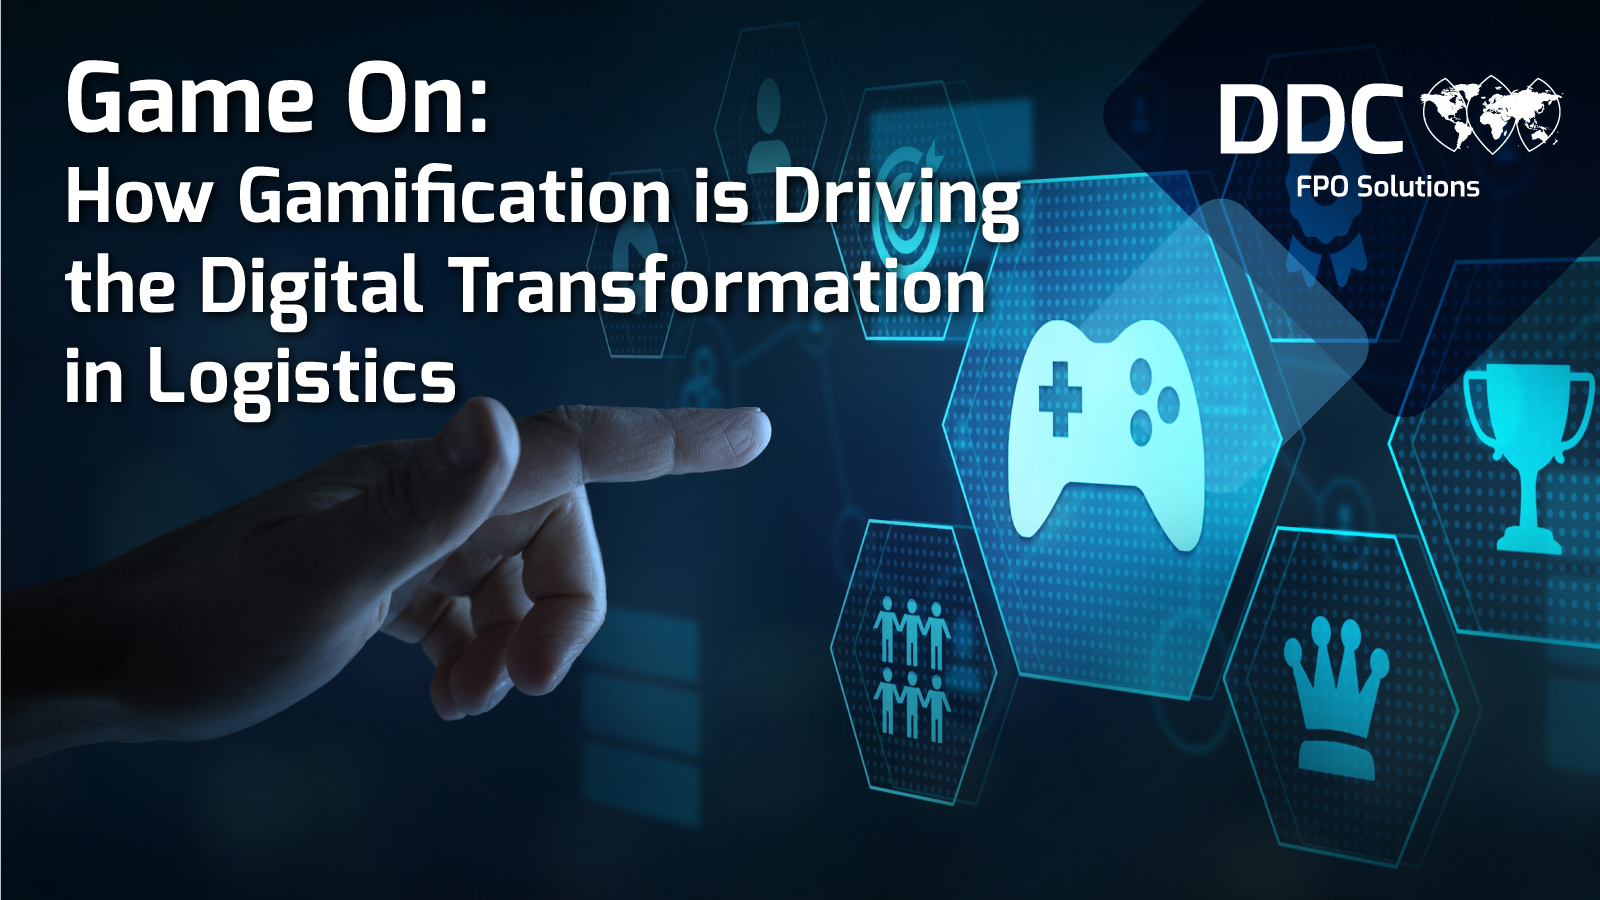 Game On: How Gamification is Driving the Digital Transformation in Logistics